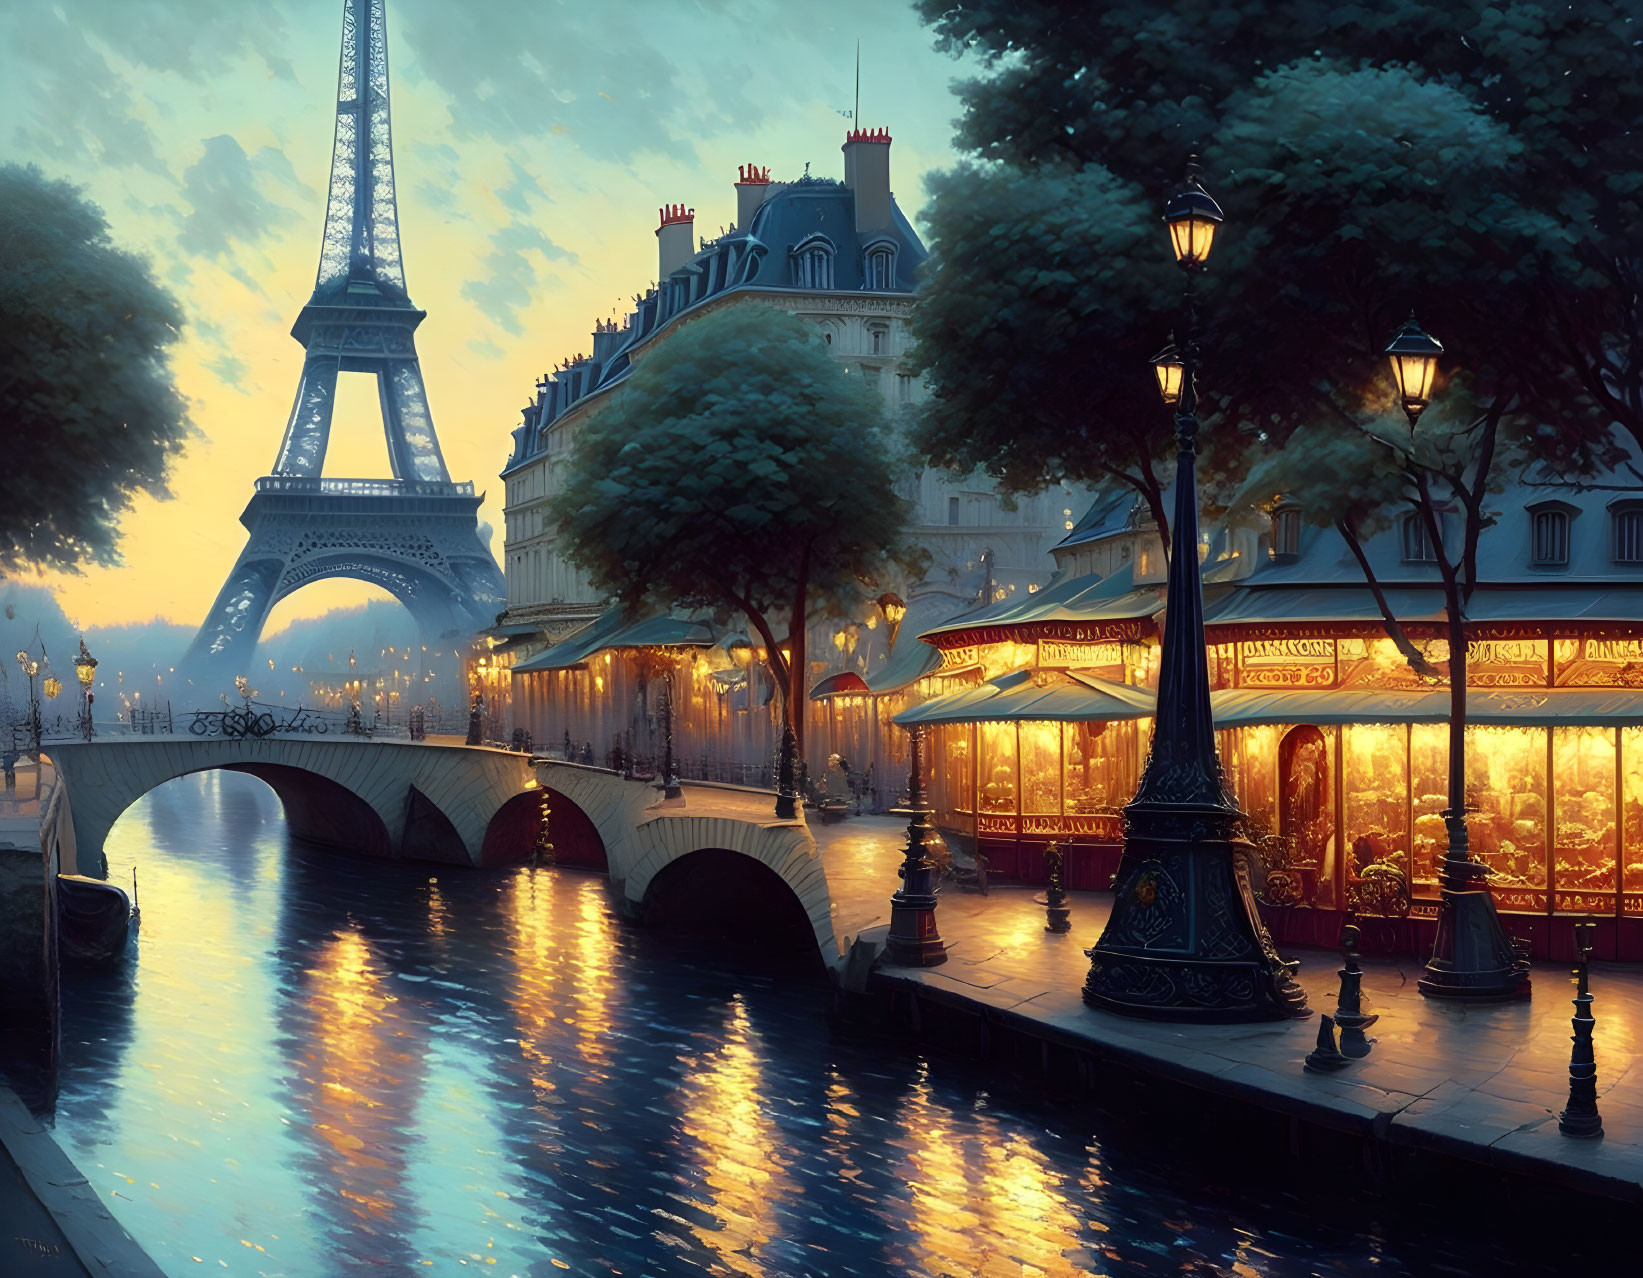 Romantic Parisian scene at twilight with Eiffel Tower, illuminated street lamps, river, and